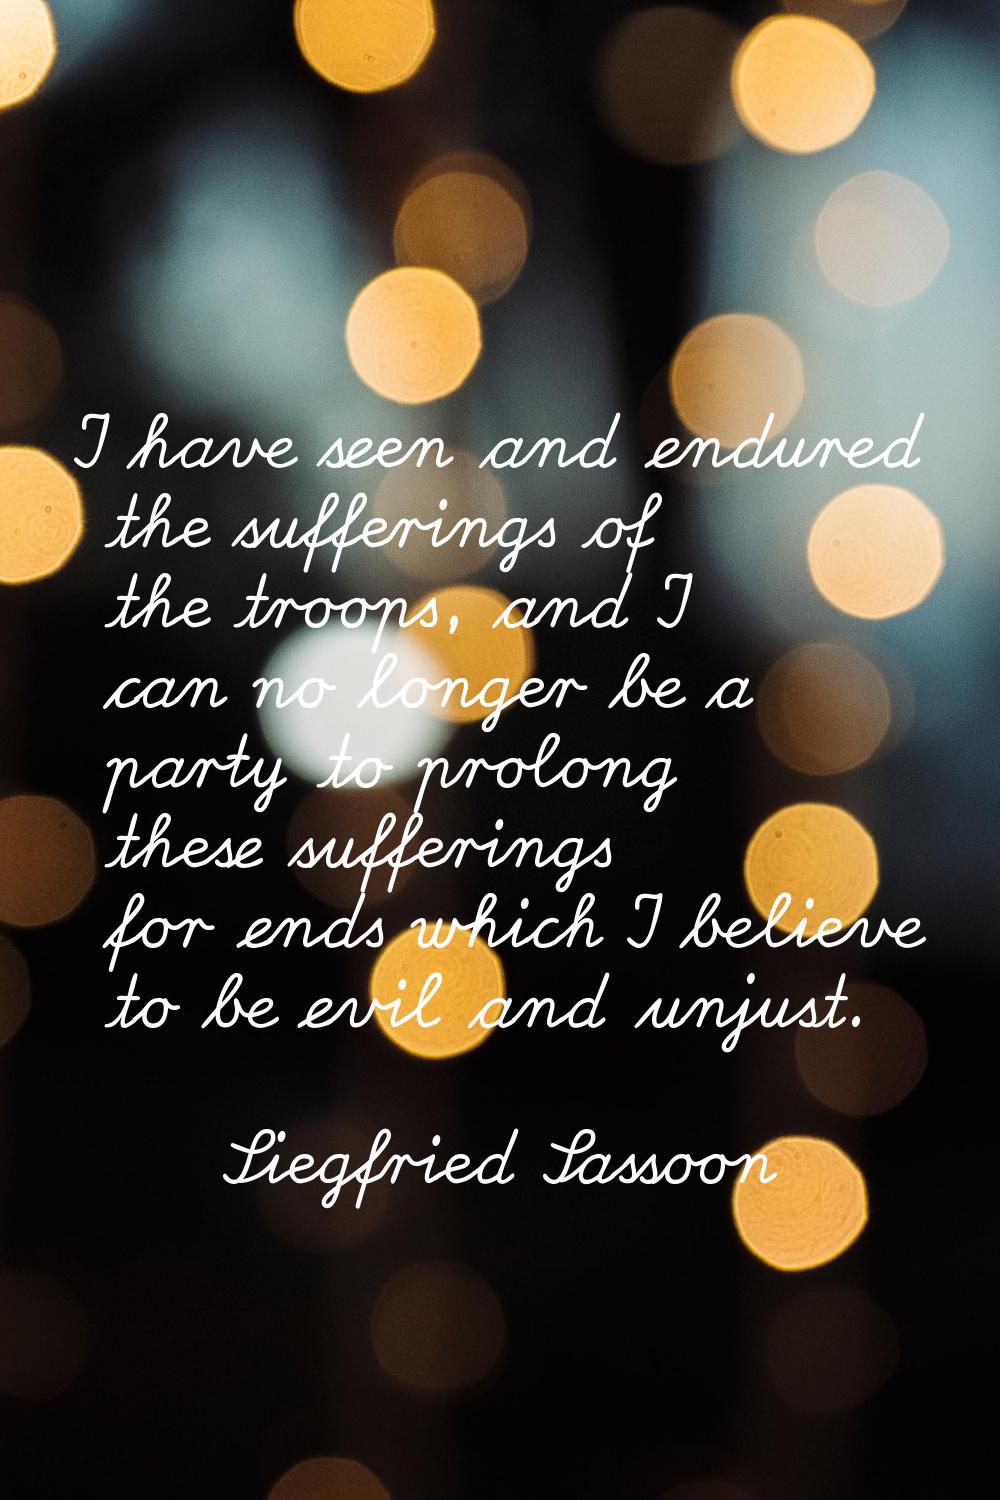 I have seen and endured the sufferings of the troops, and I can no longer be a party to prolong the